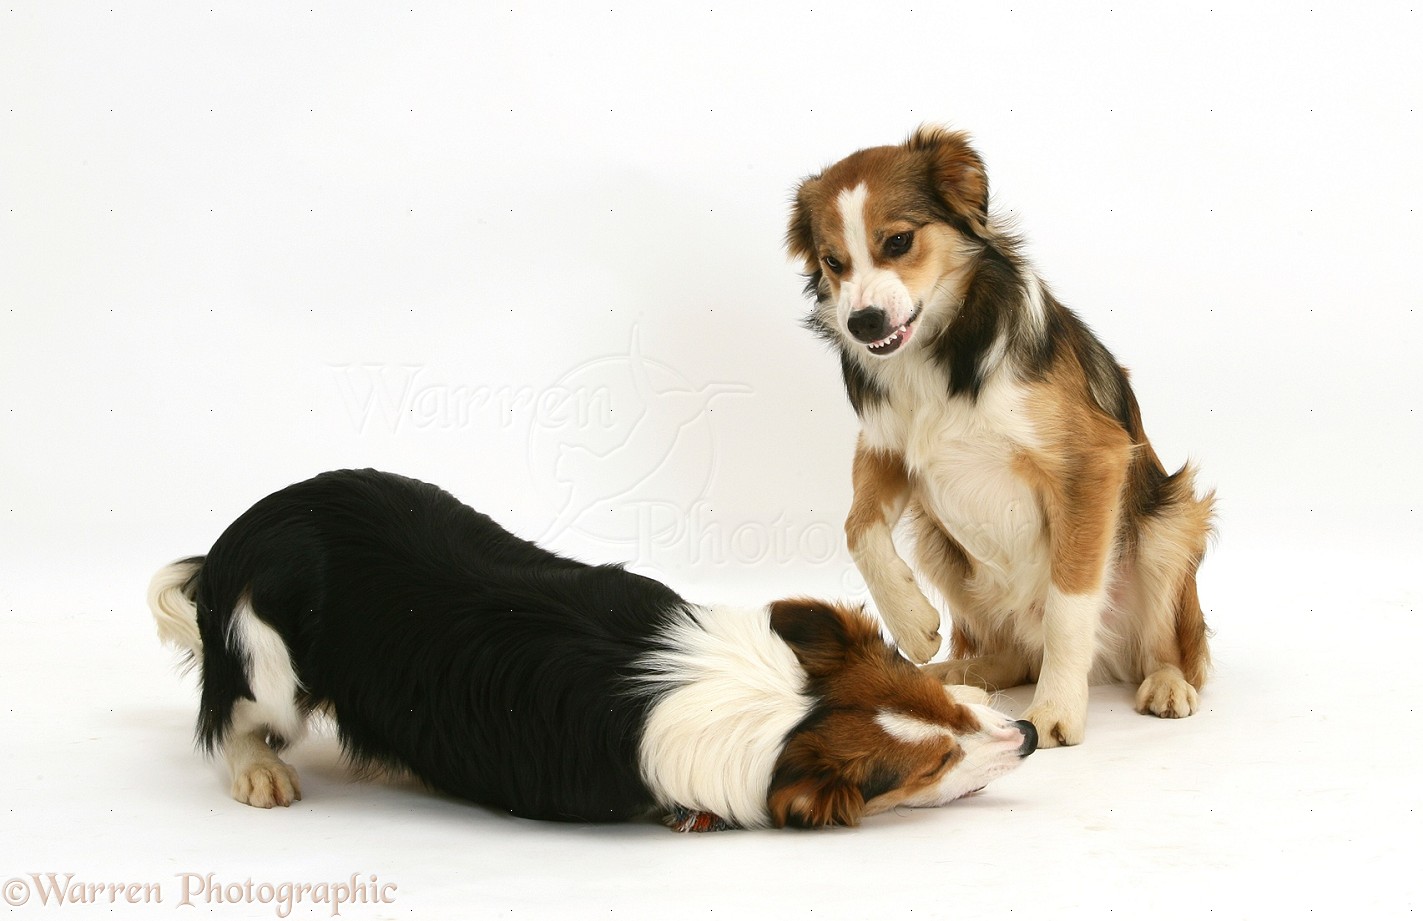 Dogs Border Collie showing aggression photo WP20262